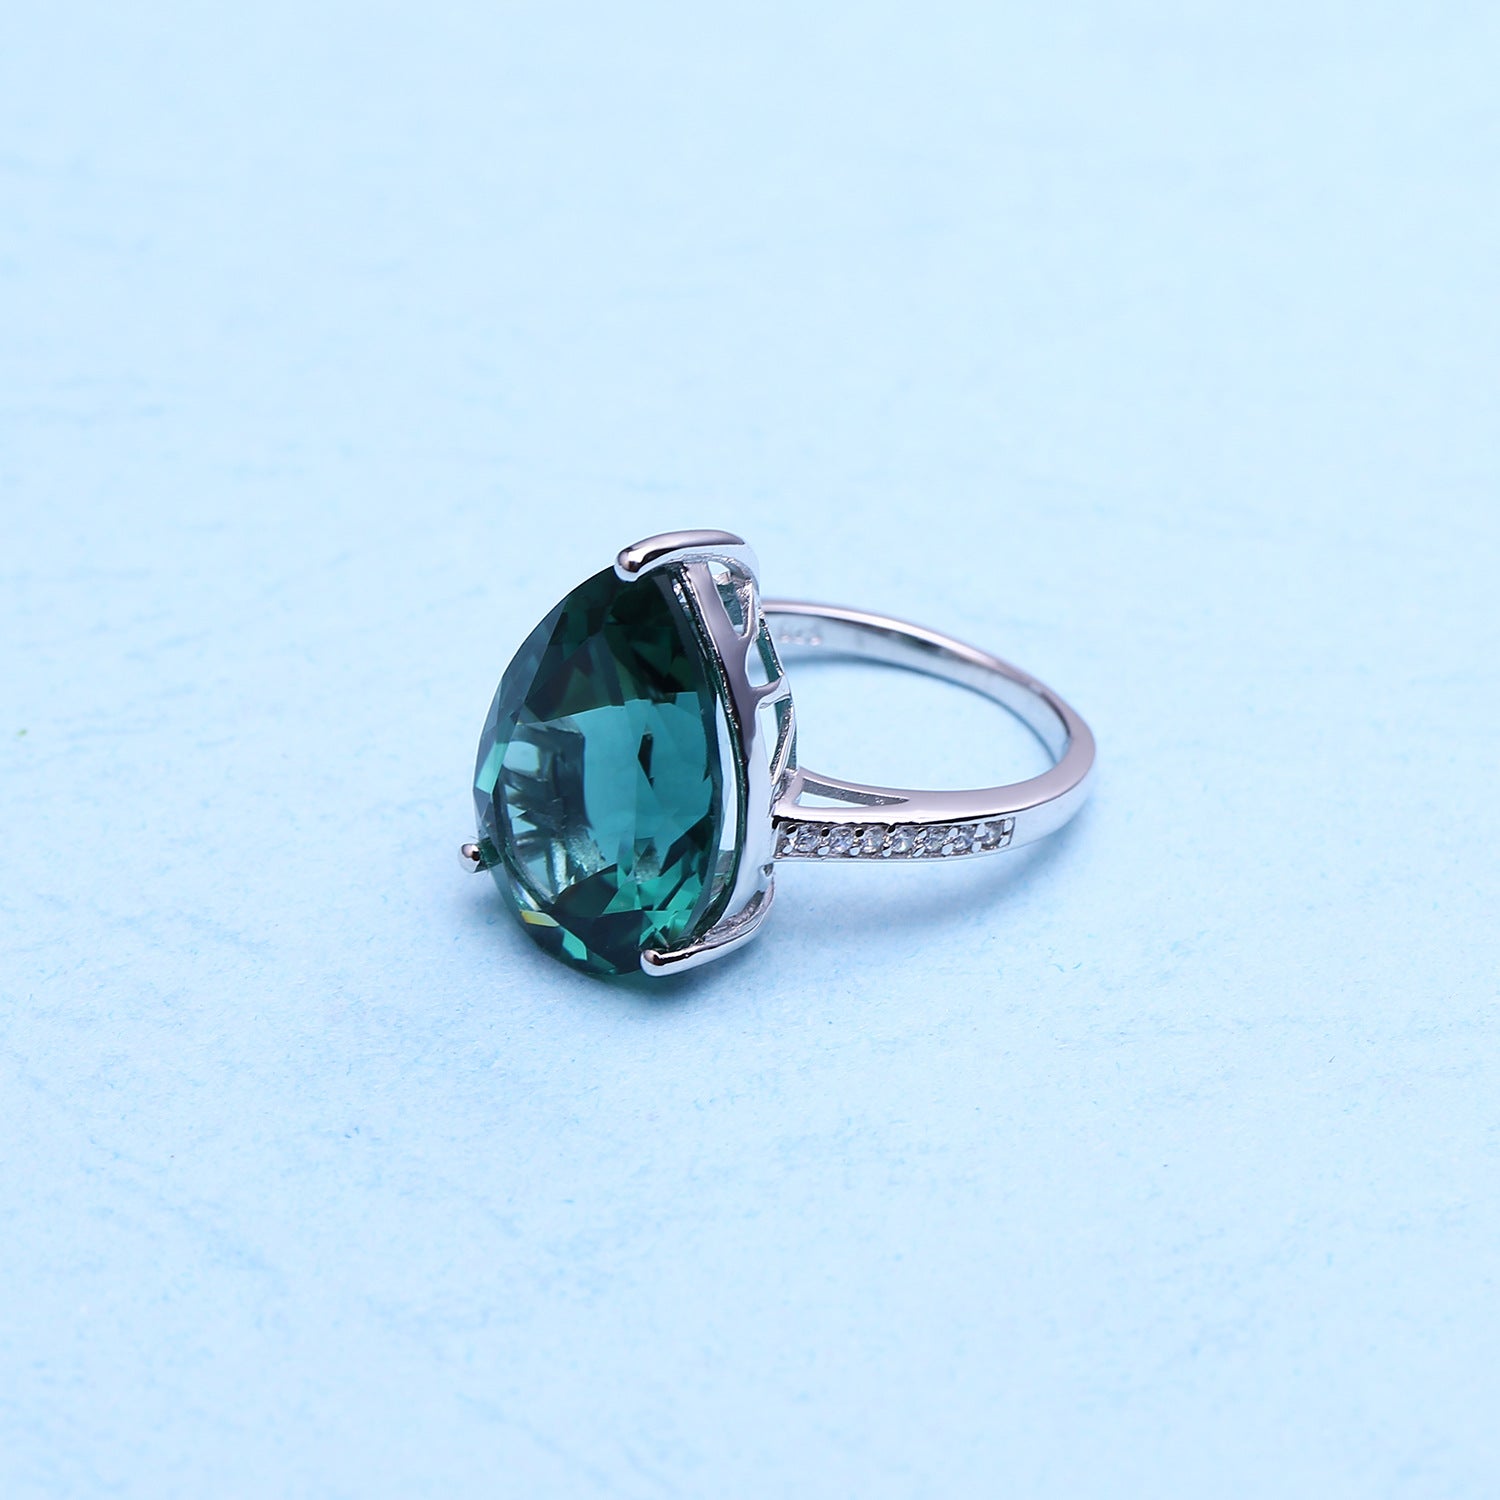 S925 Silver Inlaid Green Crystal Ring for Women